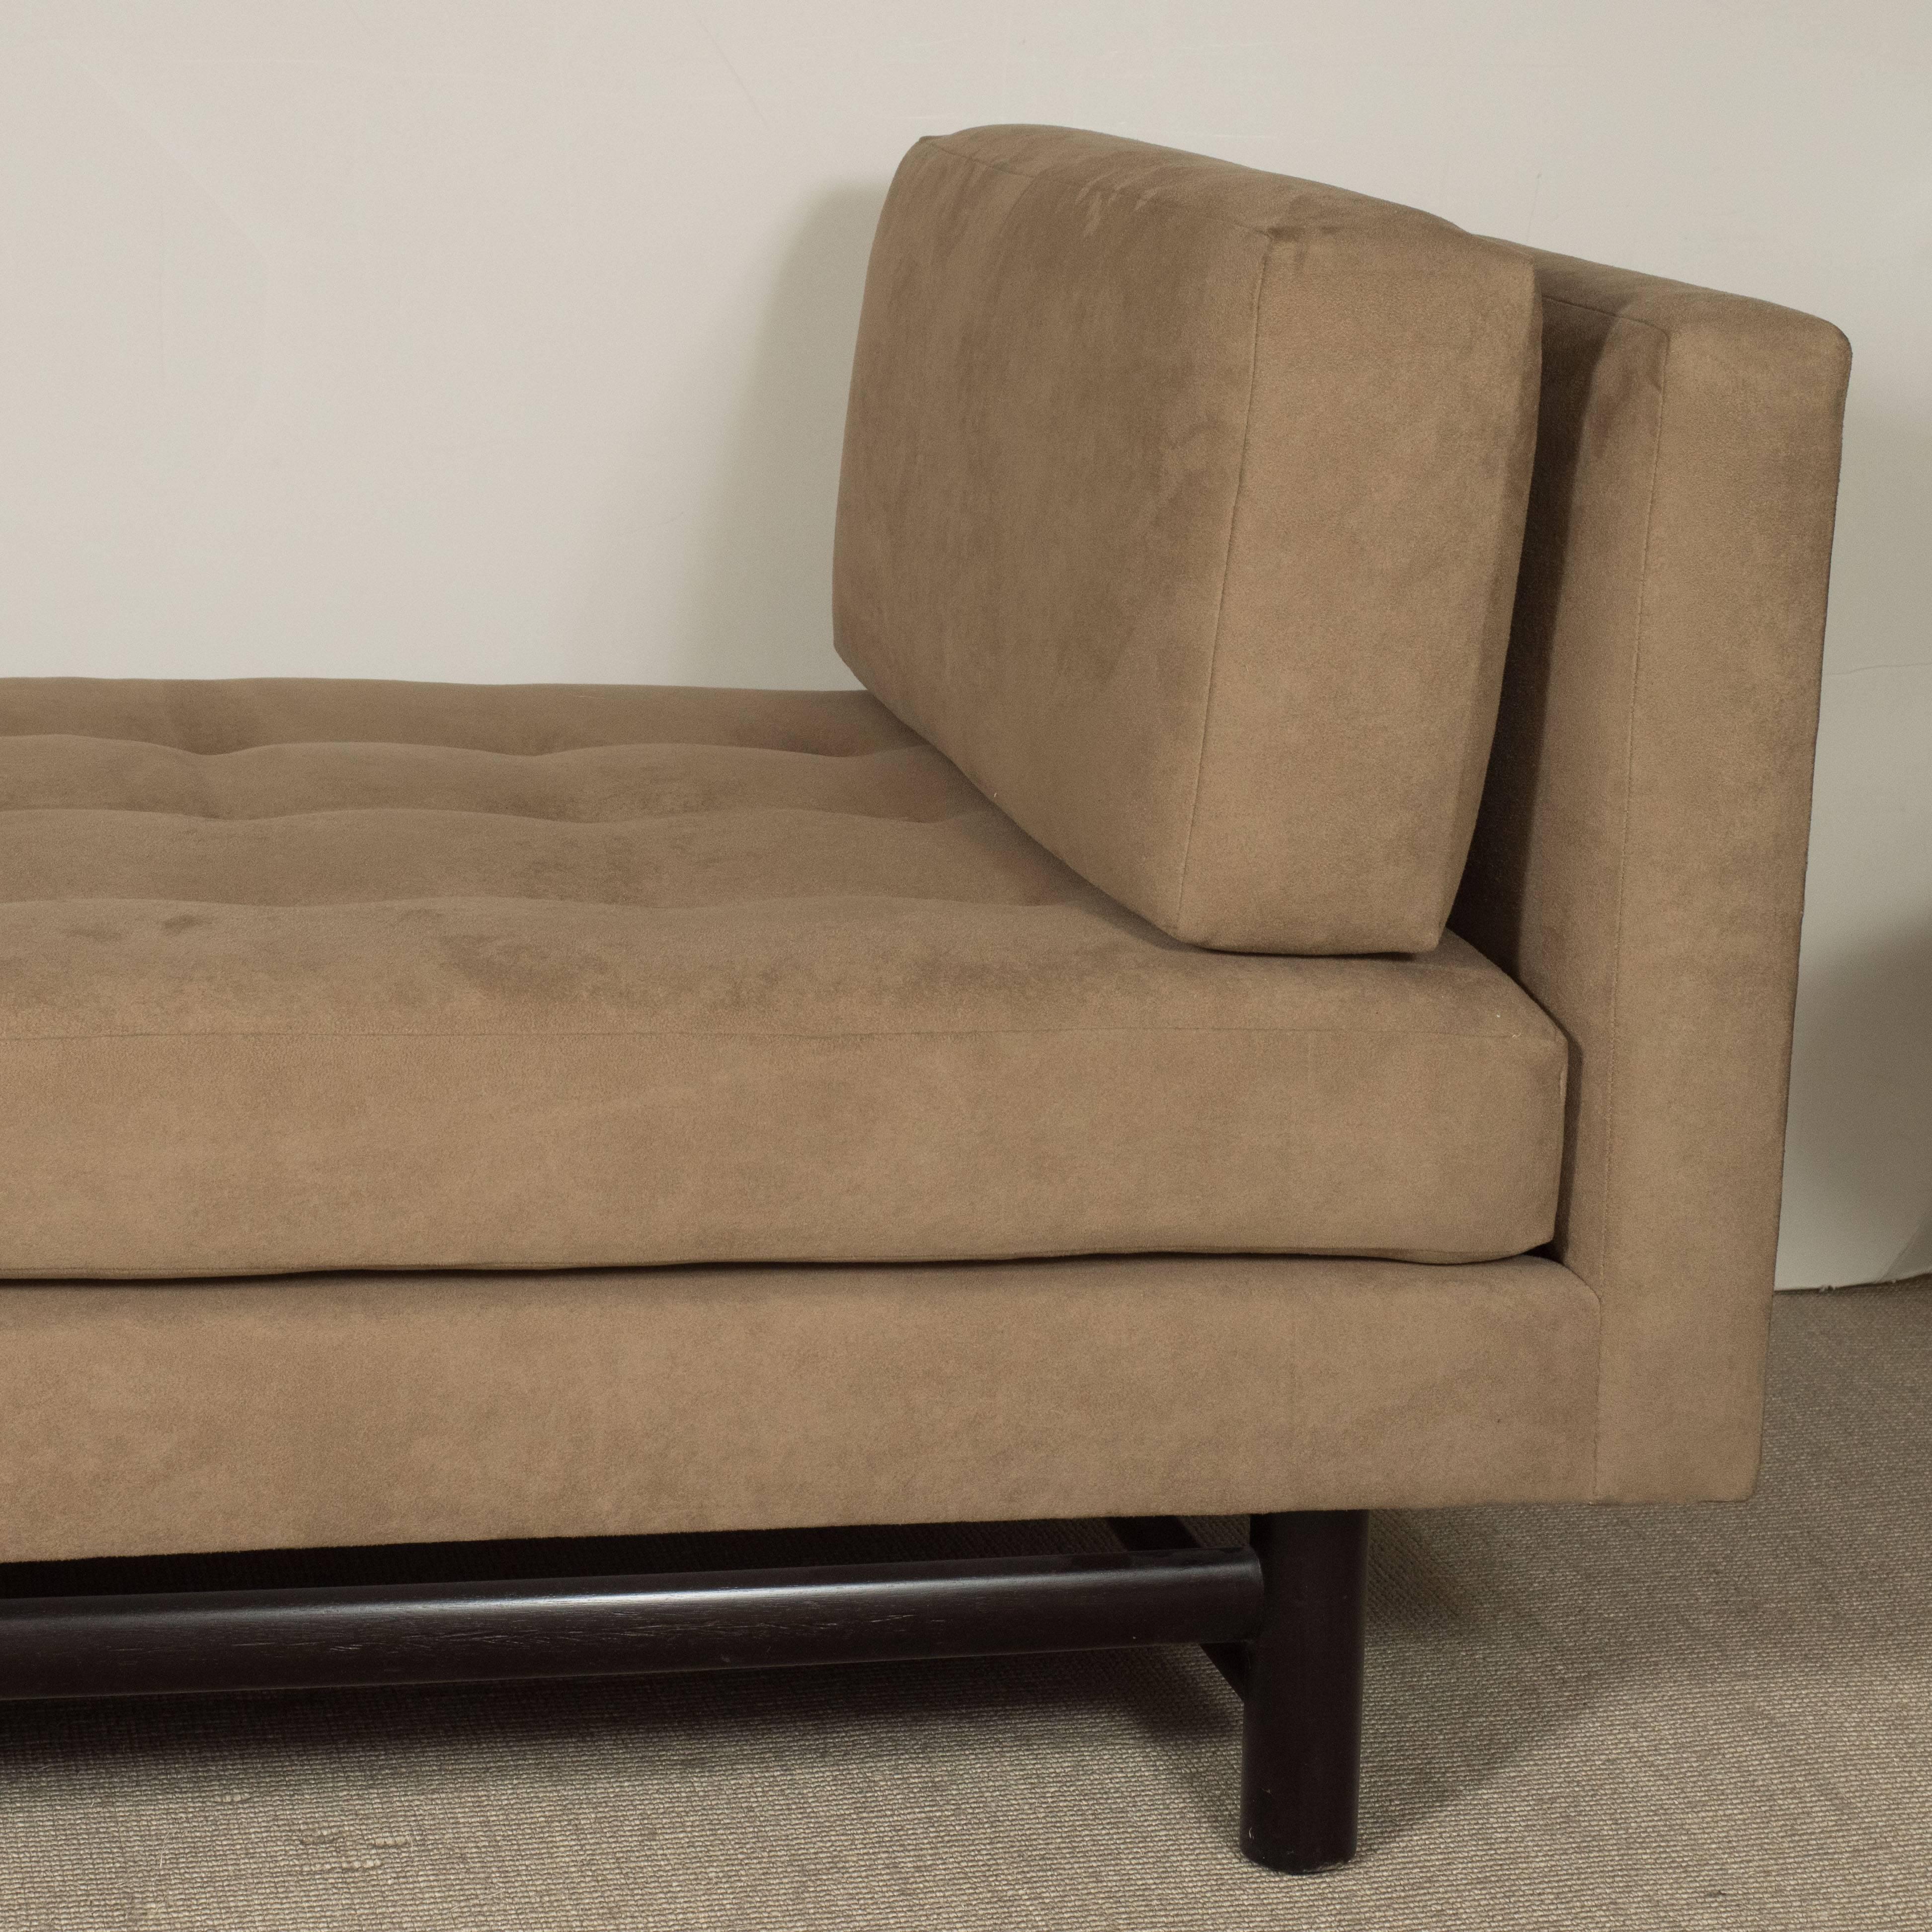 American Ed Wormley for Dunbar Rectangular Upholstered Daybed, 1950s For Sale